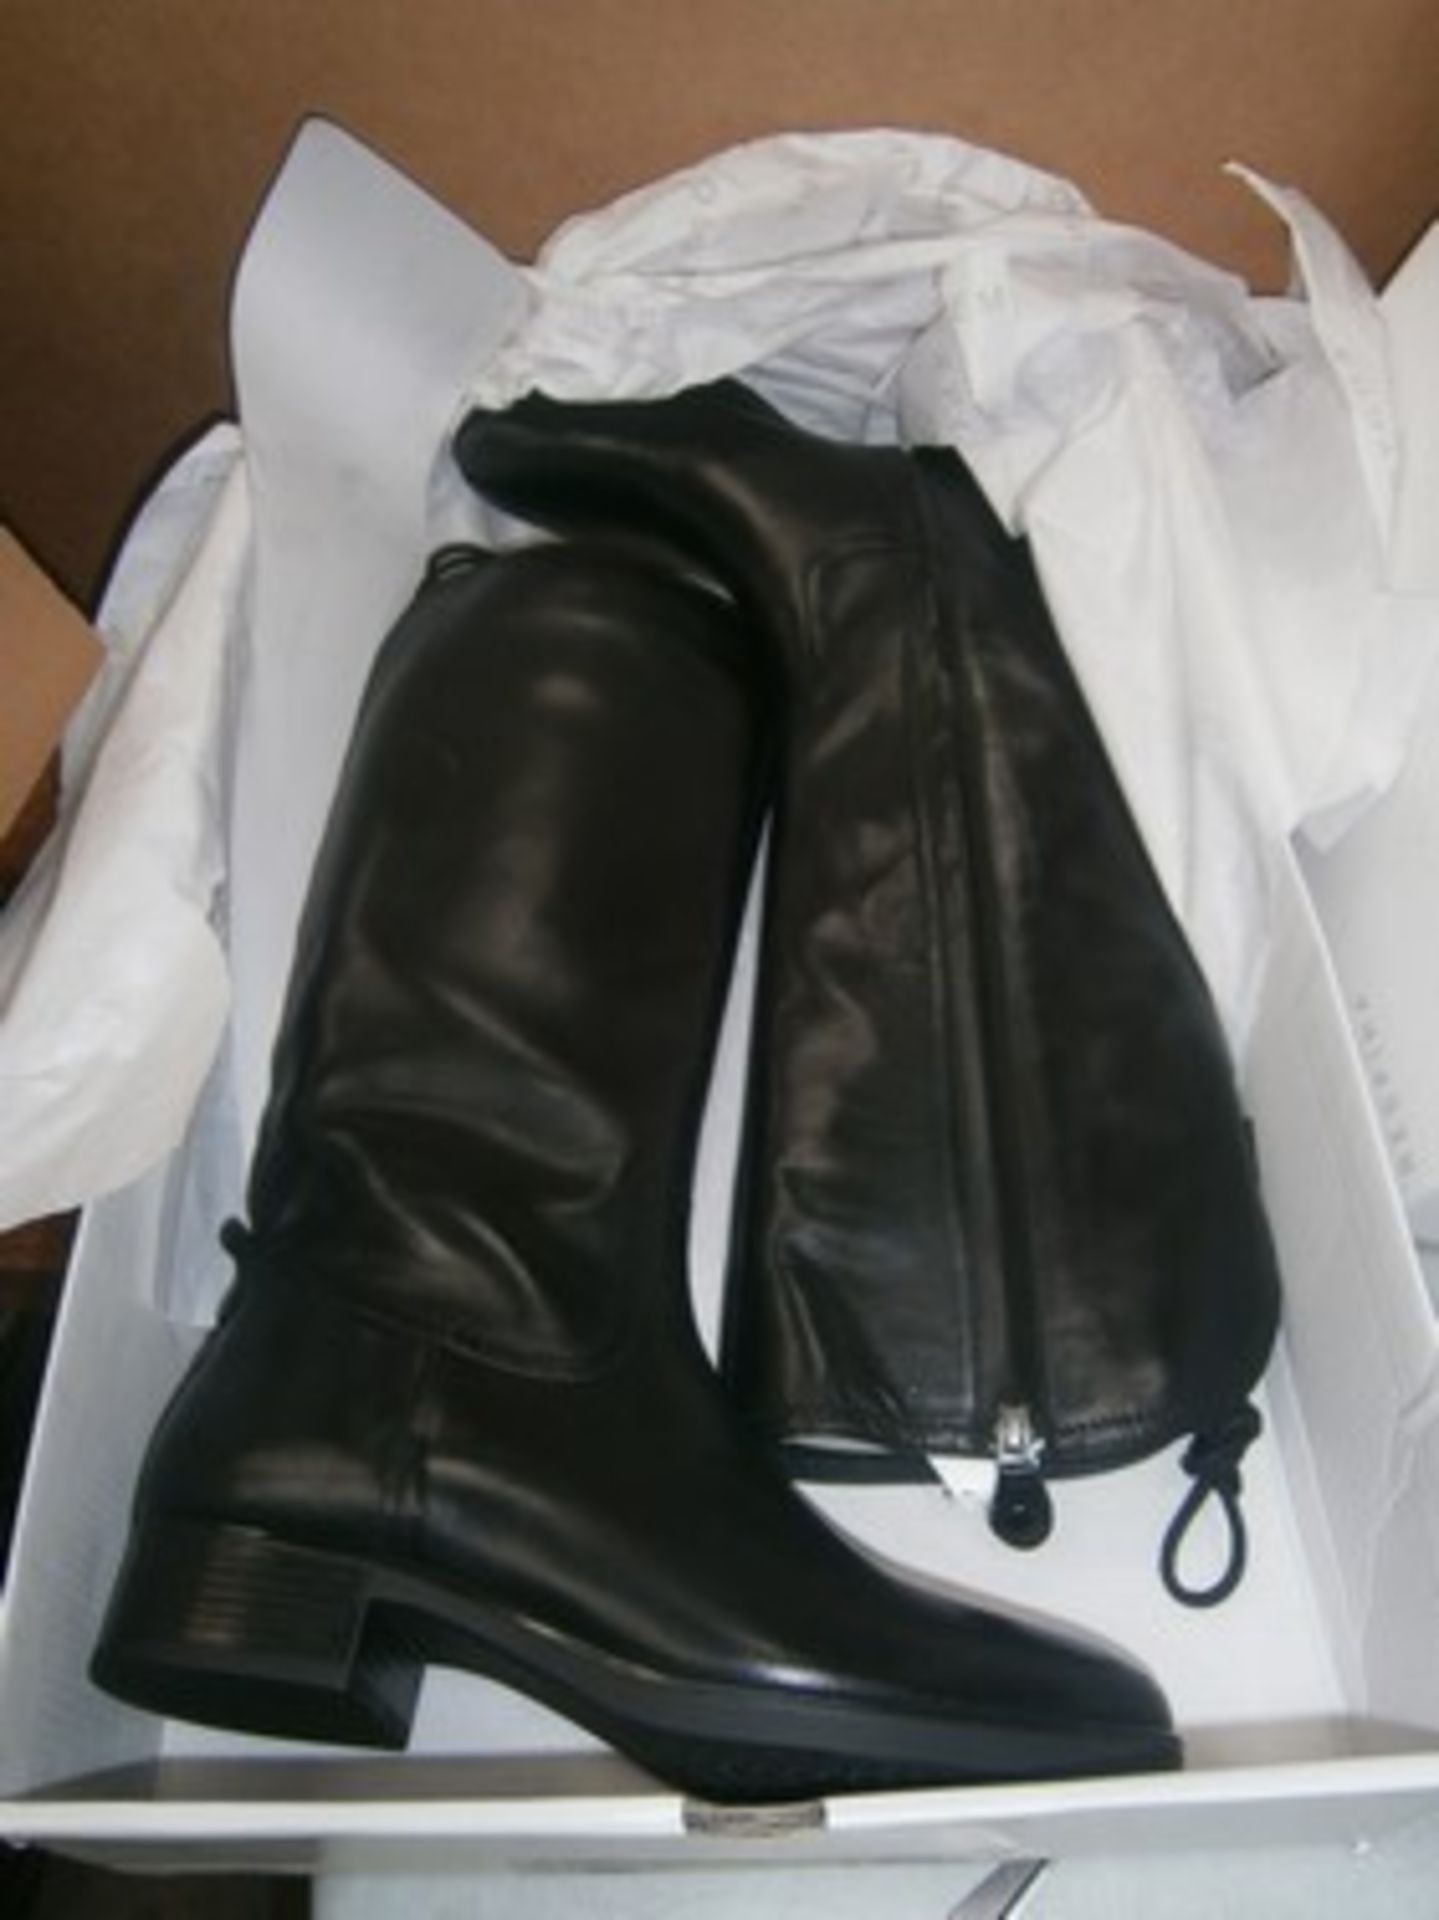 1 x Geox Felicity A leather boots, size UK 7 - new in box (E1B)